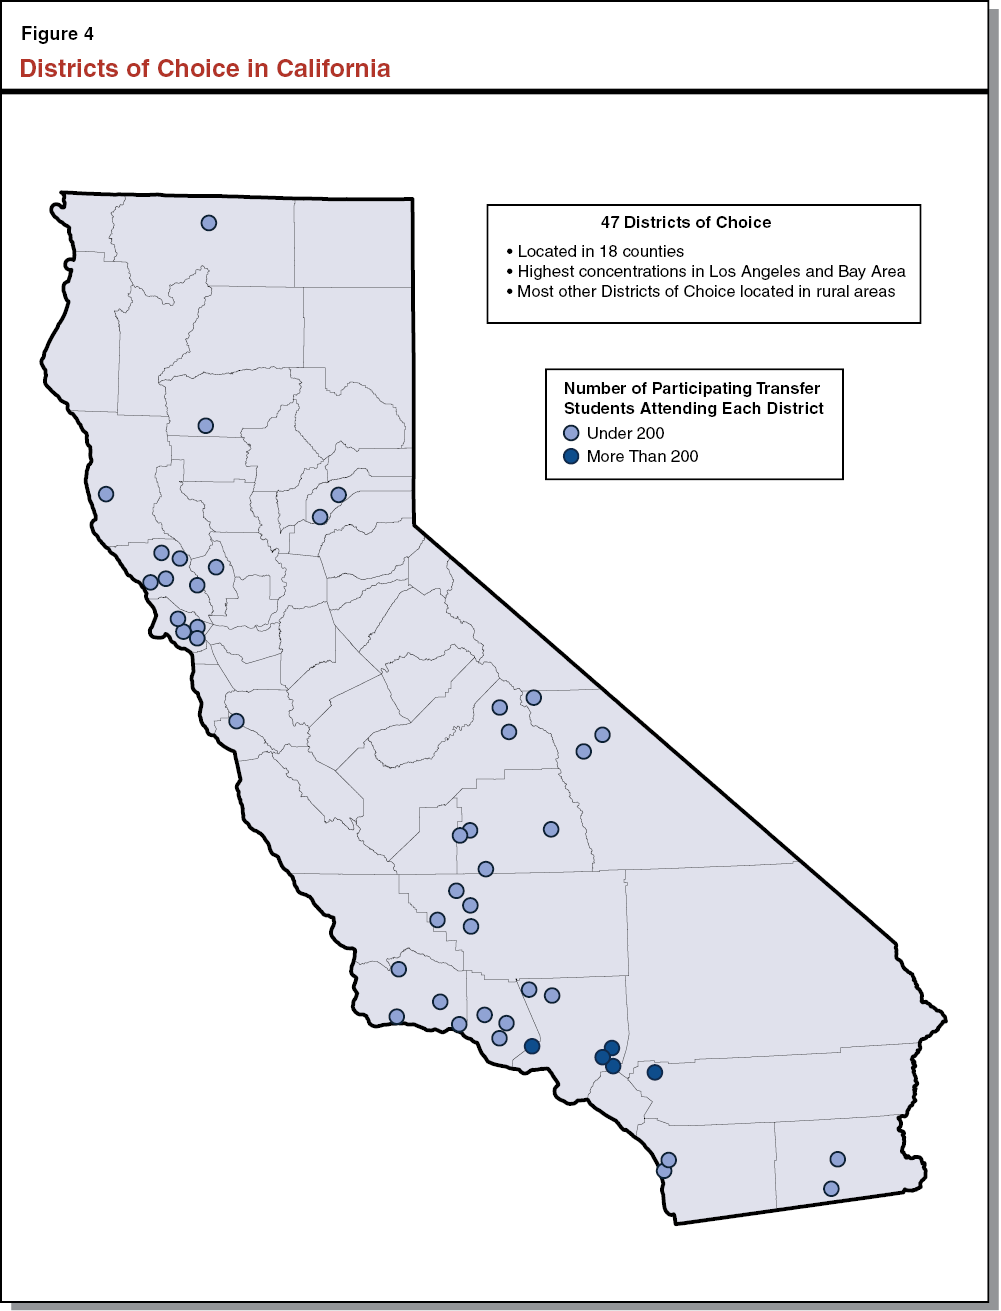 Figure 4 - Districts of Choice in California